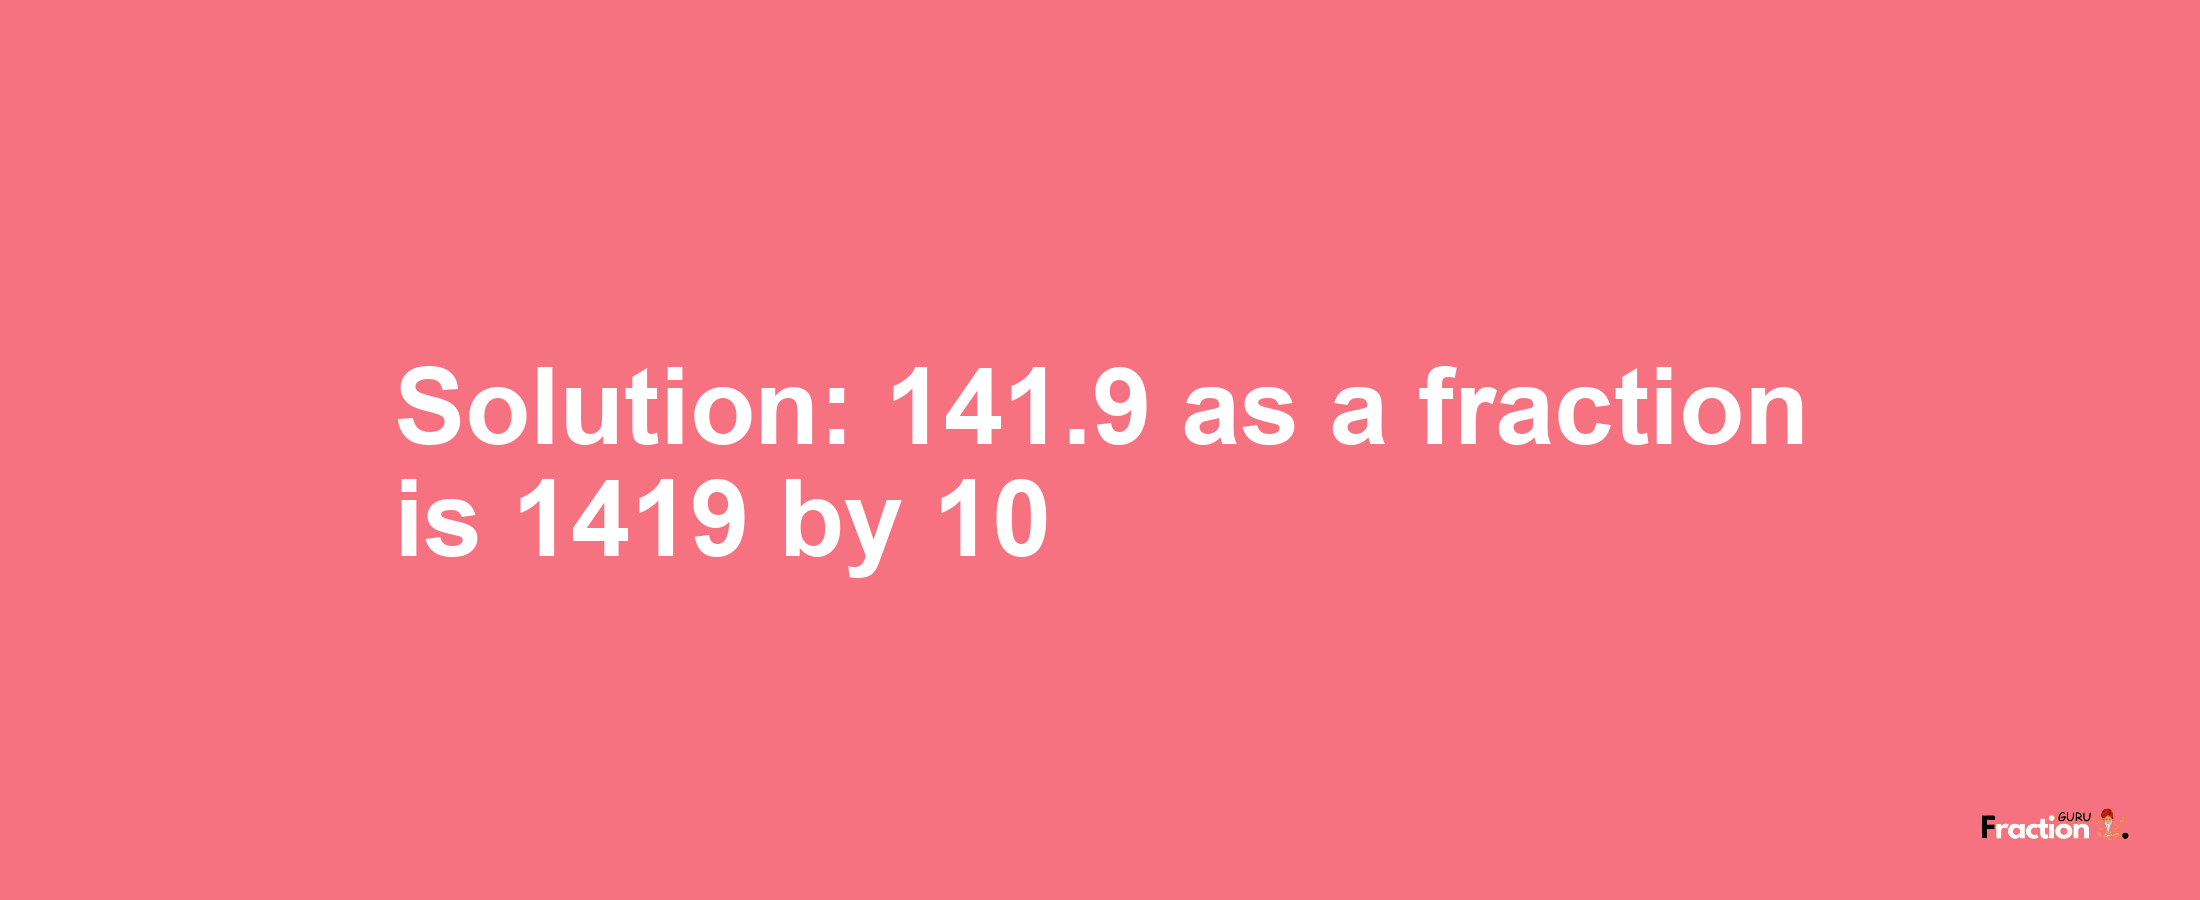 Solution:141.9 as a fraction is 1419/10